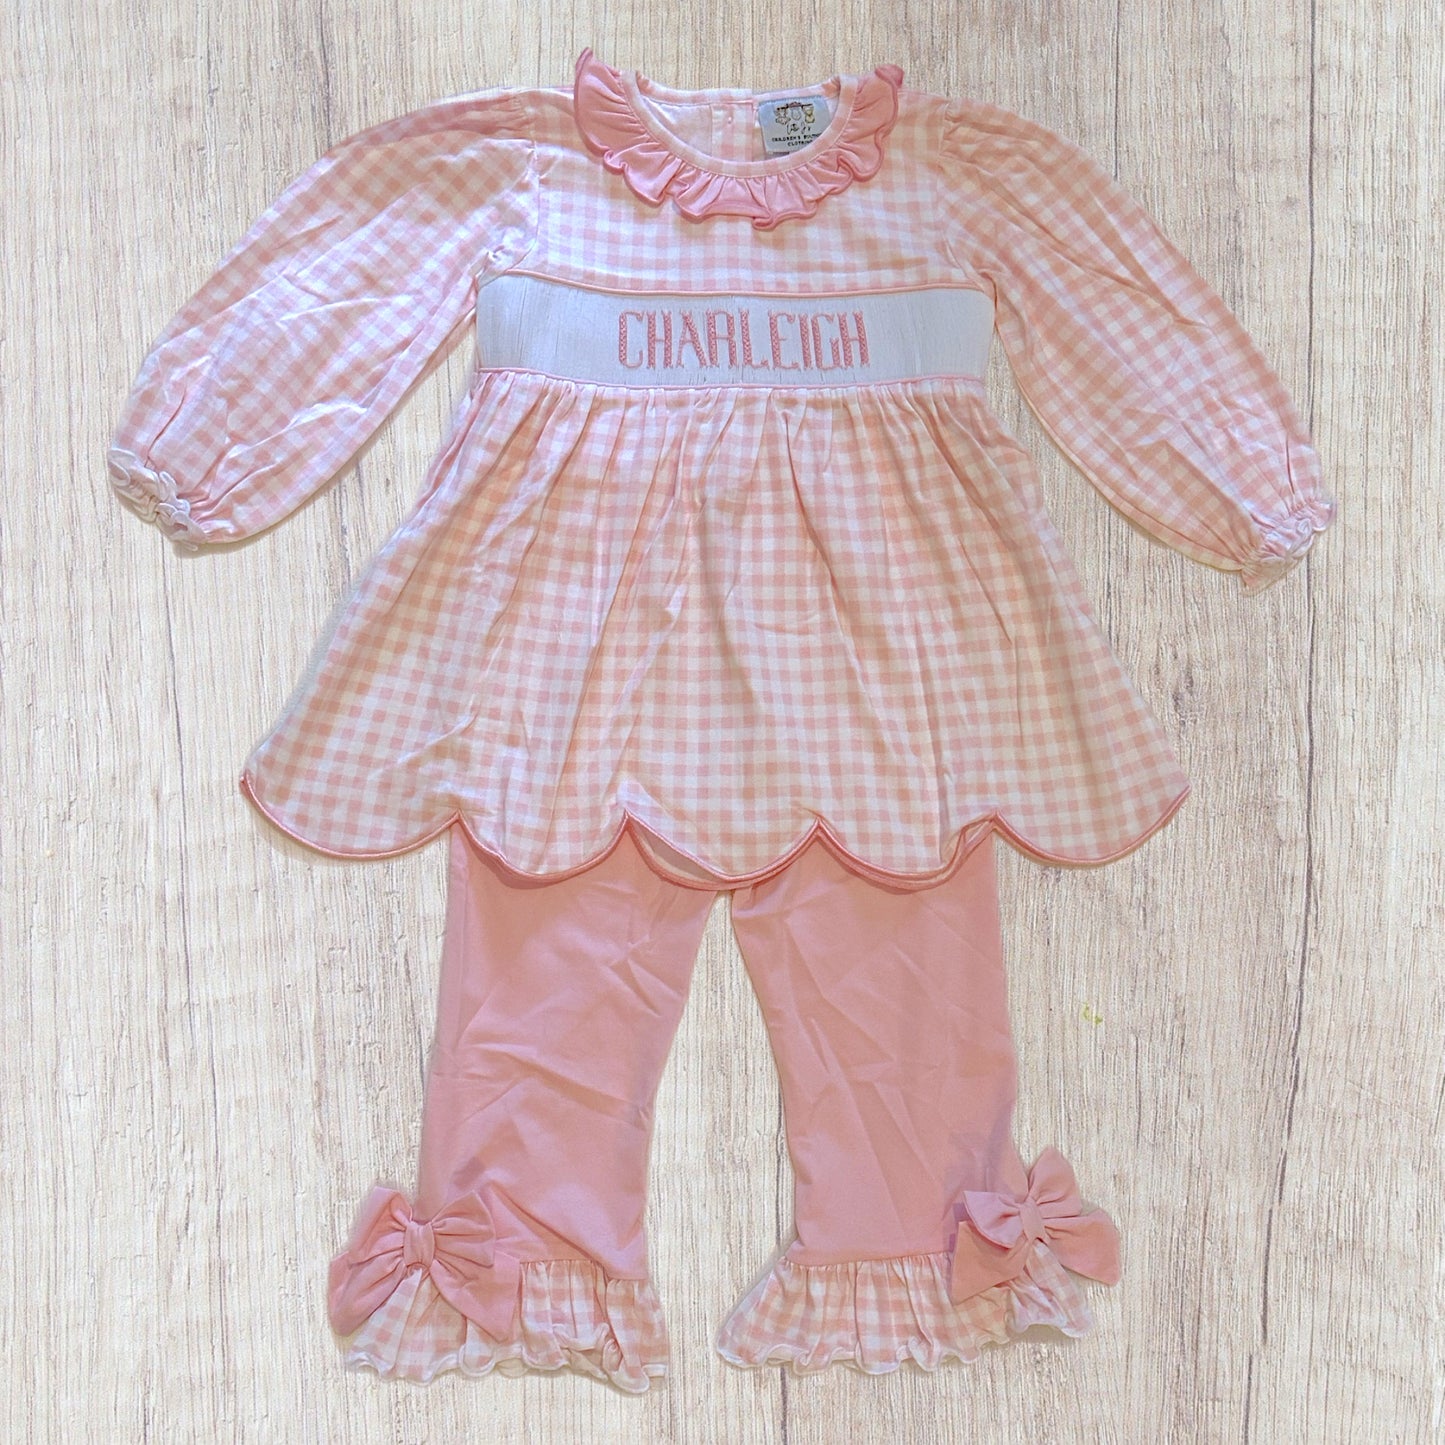 “Charleigh” 4T Embroidered Pink Pant Set (RTS)